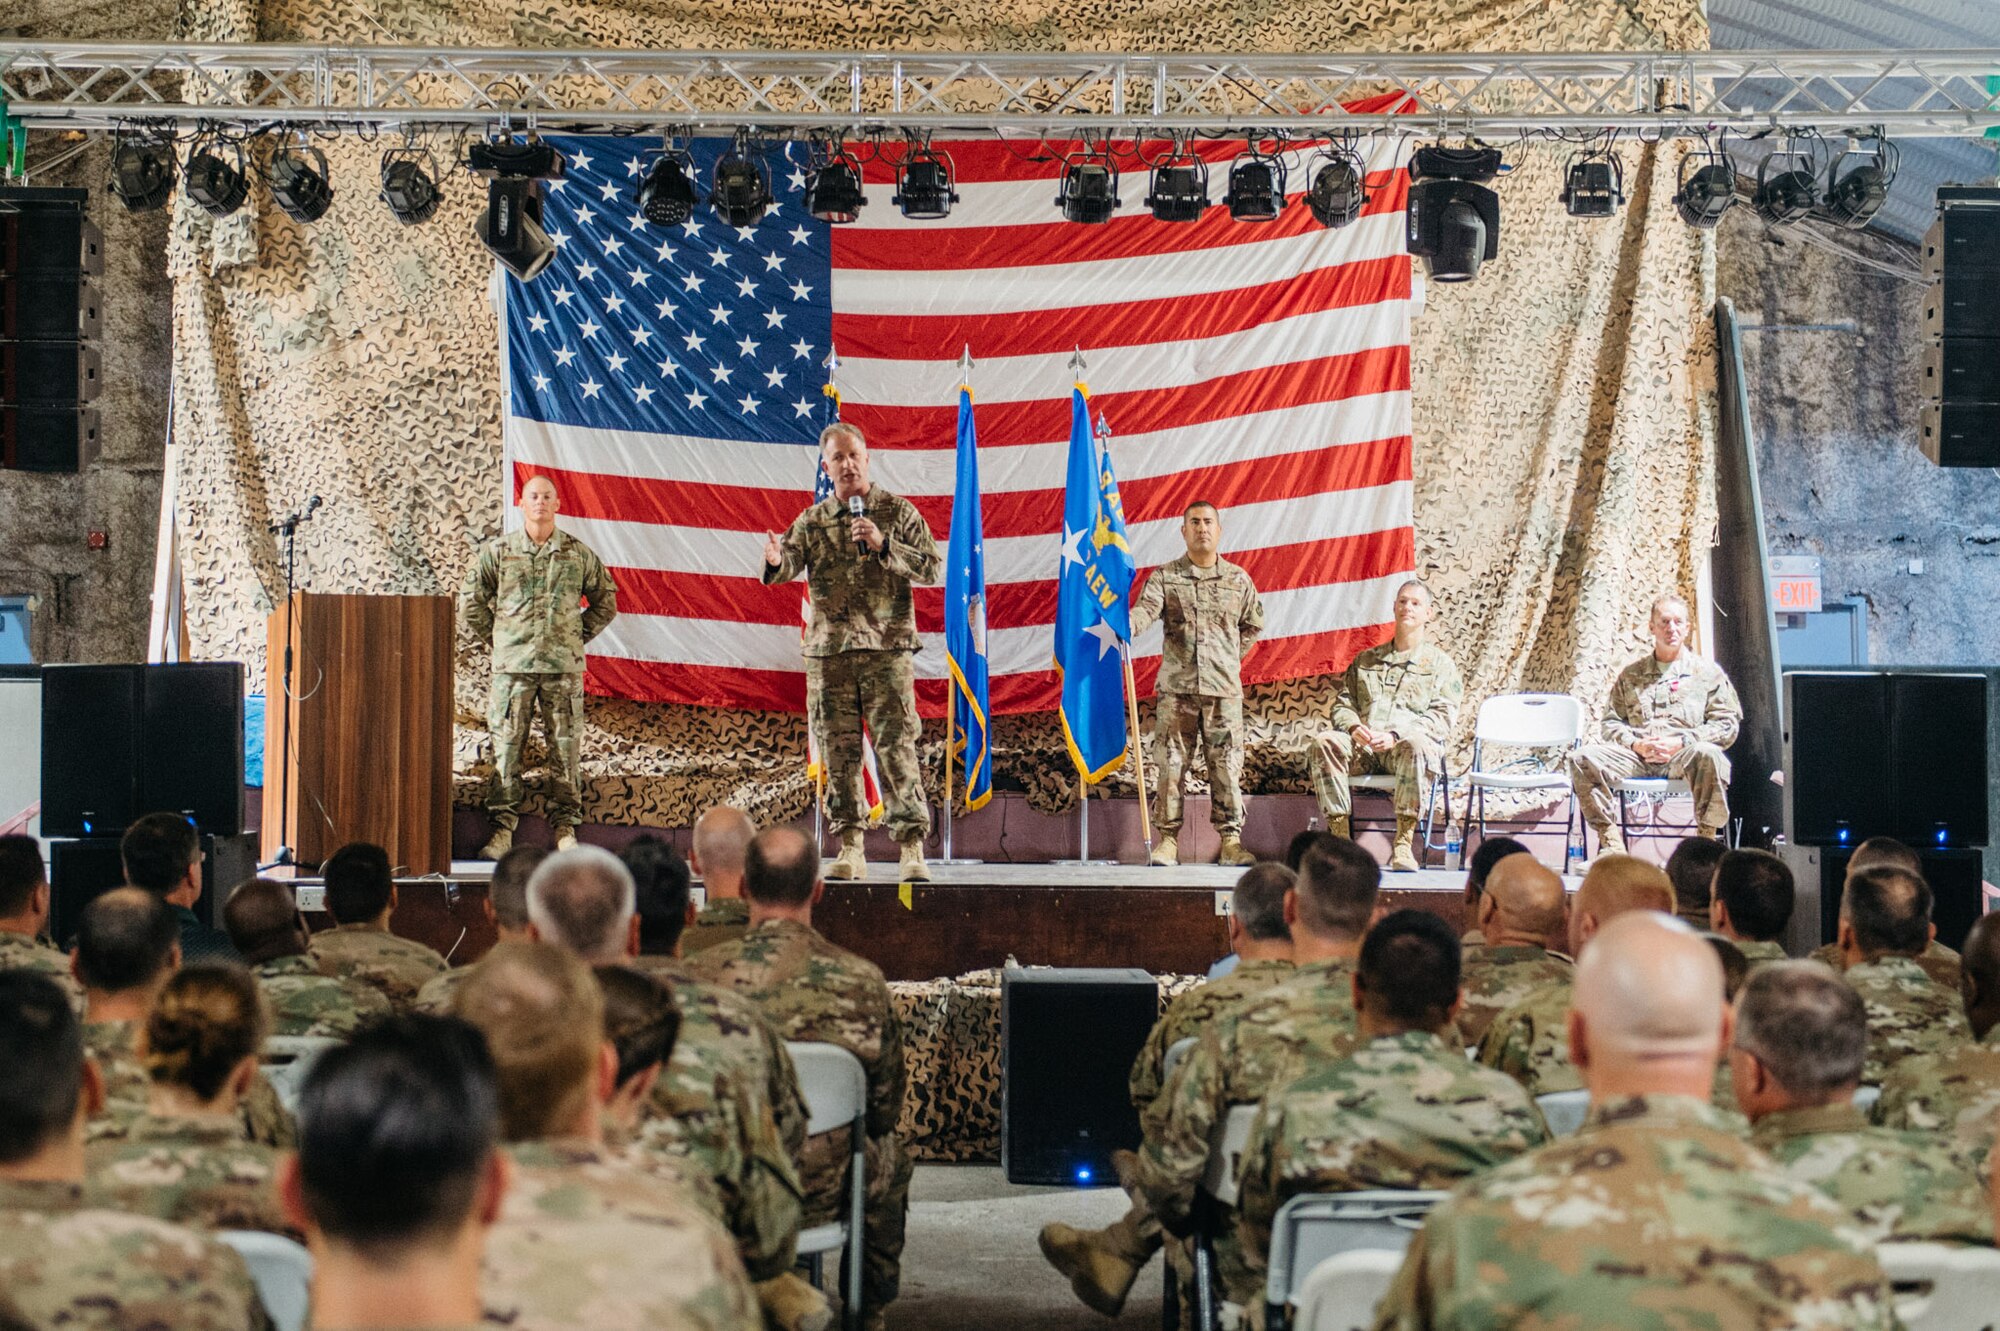 Brig. Gen. Mark Slocum addresses members of the 332nd Air Expeditionary Wing for the first time during a change of command ceremony in Southwest Asia, June 20, 2019.